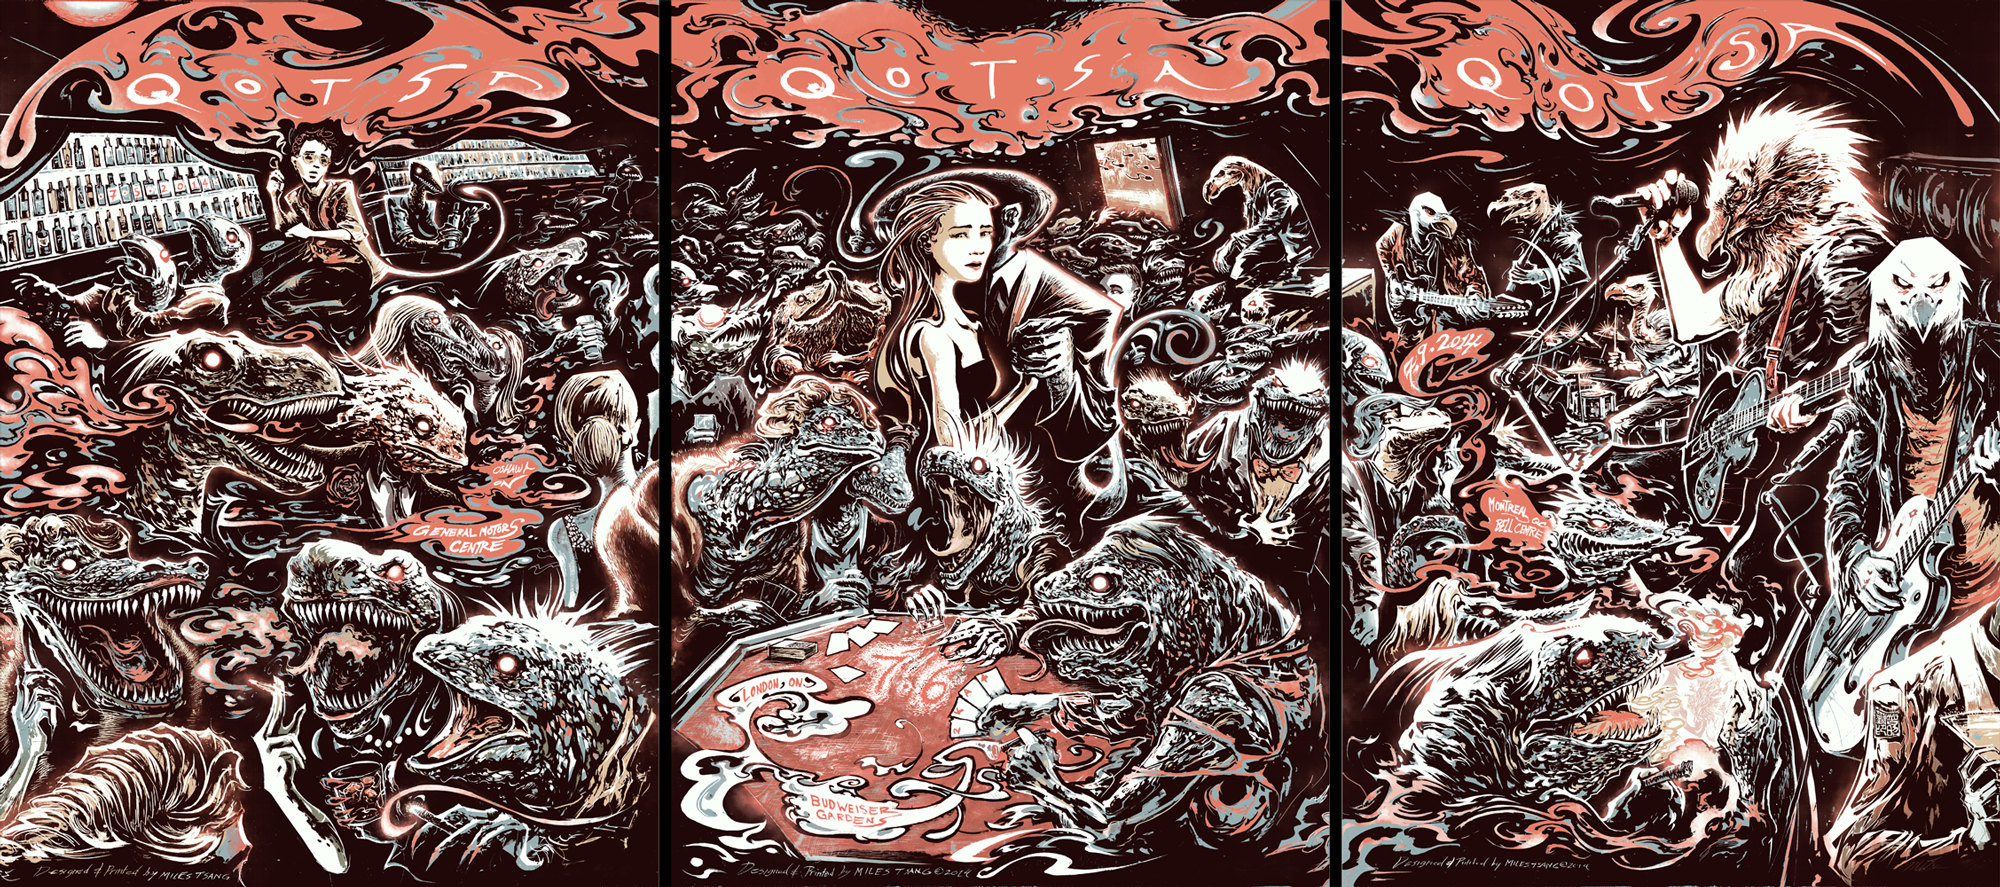 Queens of the Stone Age -Triptych Print, Canada 2014 by Miles Tsang